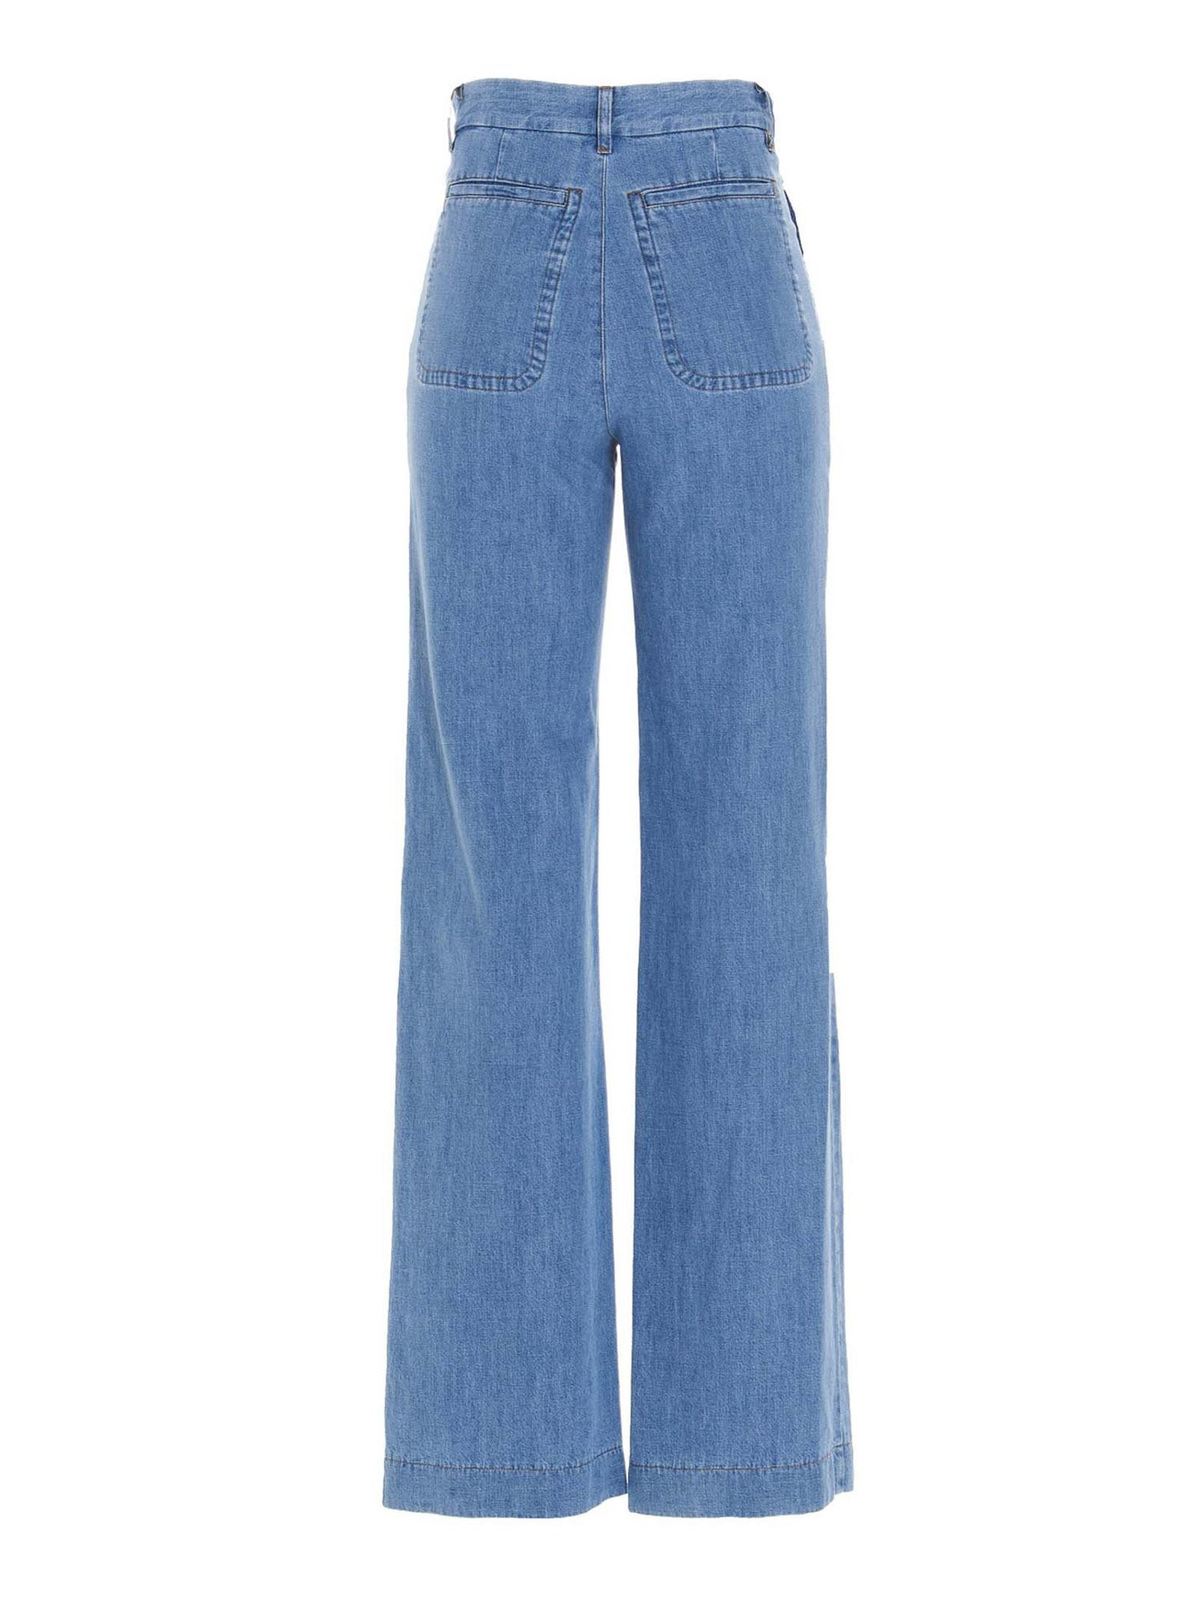 Flared jeans A.P.C. - Flared jeans in light blue - COEOKF09085IAB